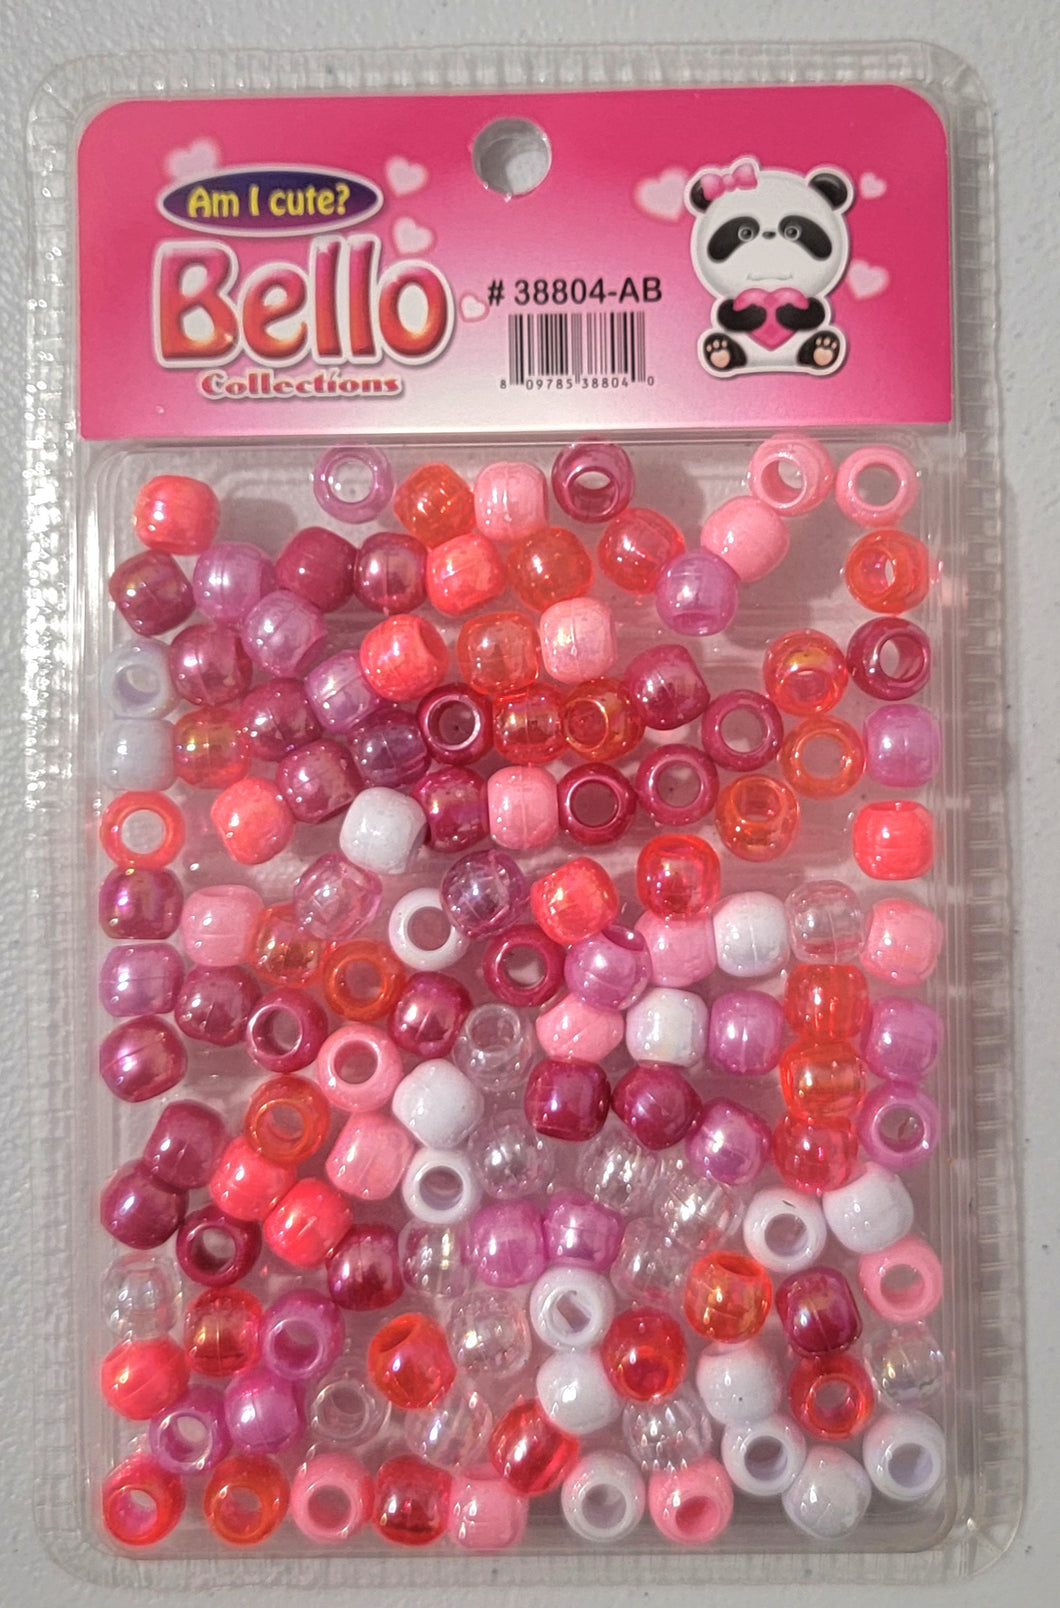 Bello Collections Large Beads, 1 pk